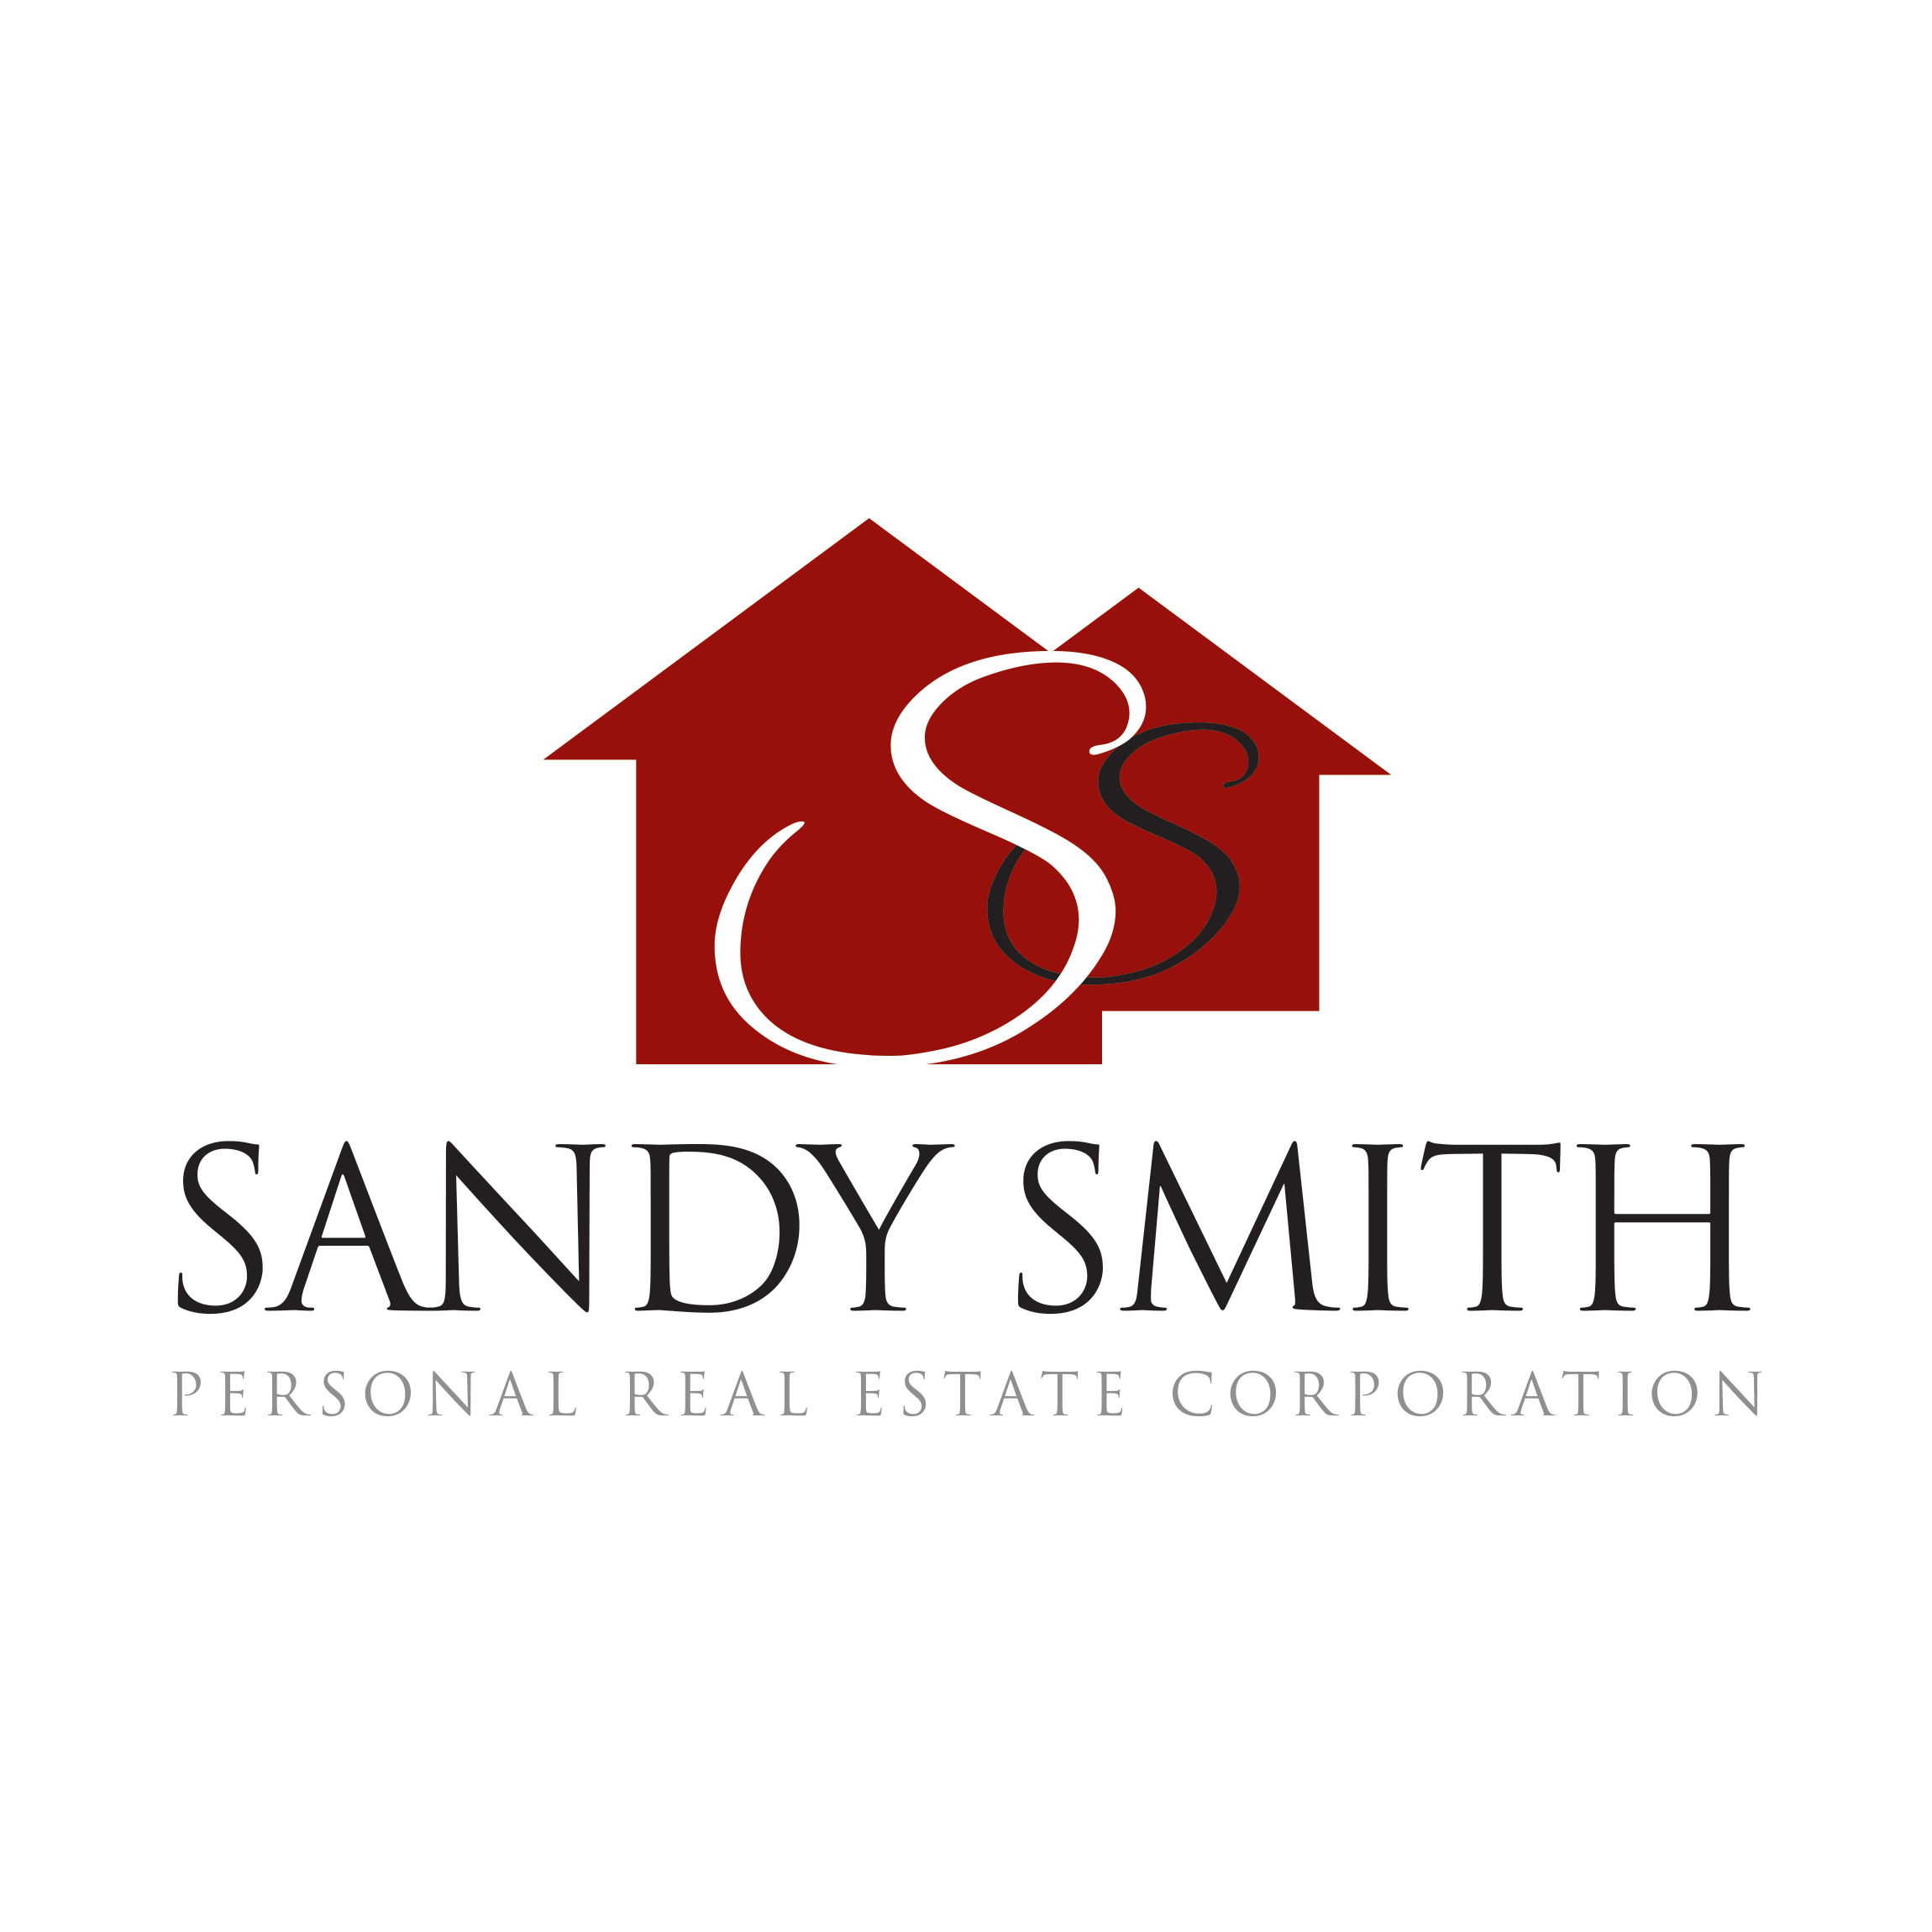 Sandy Smith Personal Real Estate